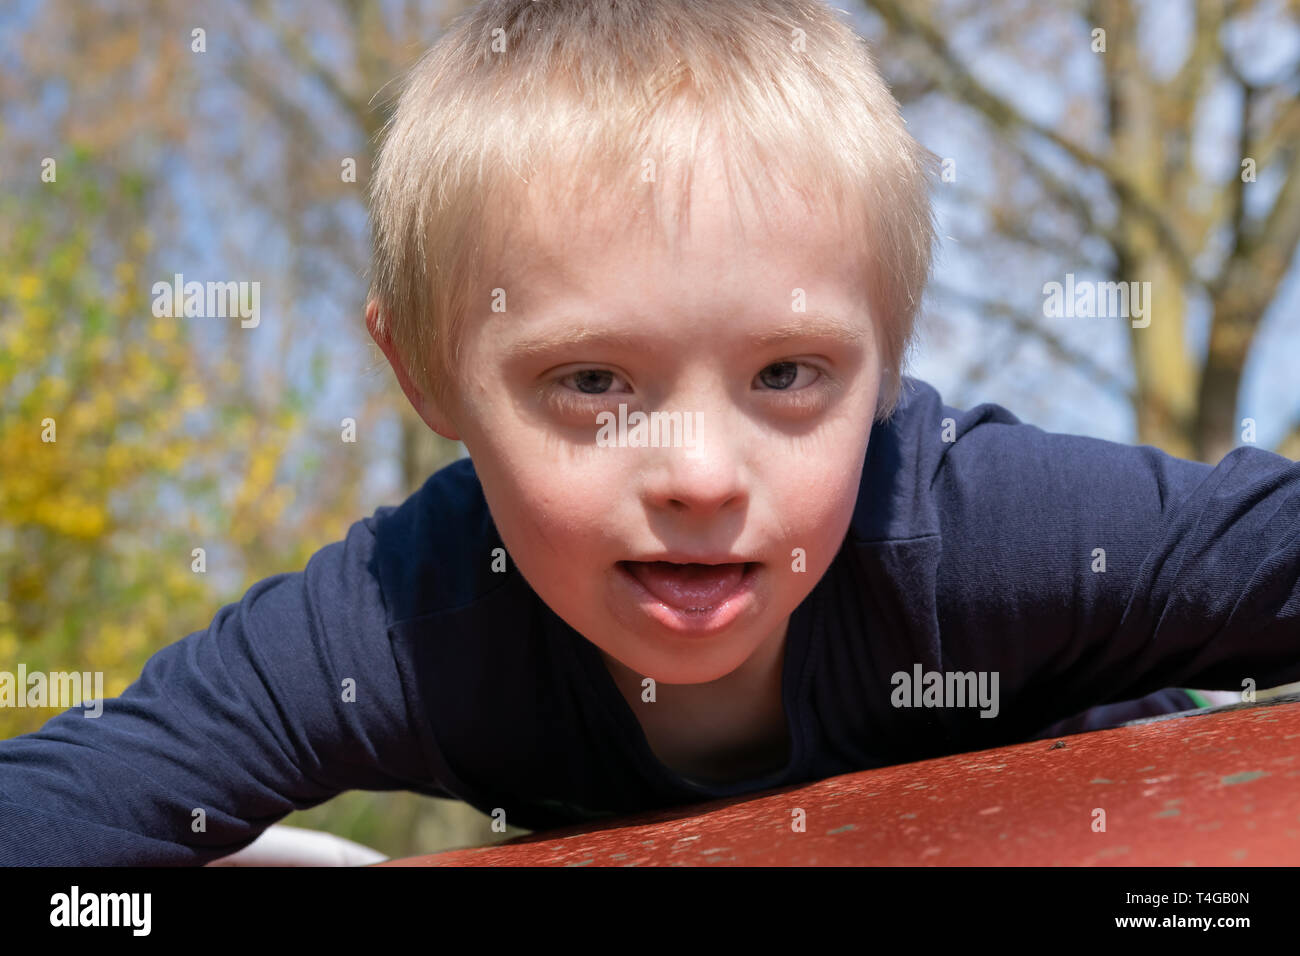 Defect,childcare,medicine and people concept: Blond boy with down syndrome playing in a park at spring time. Stock Photo